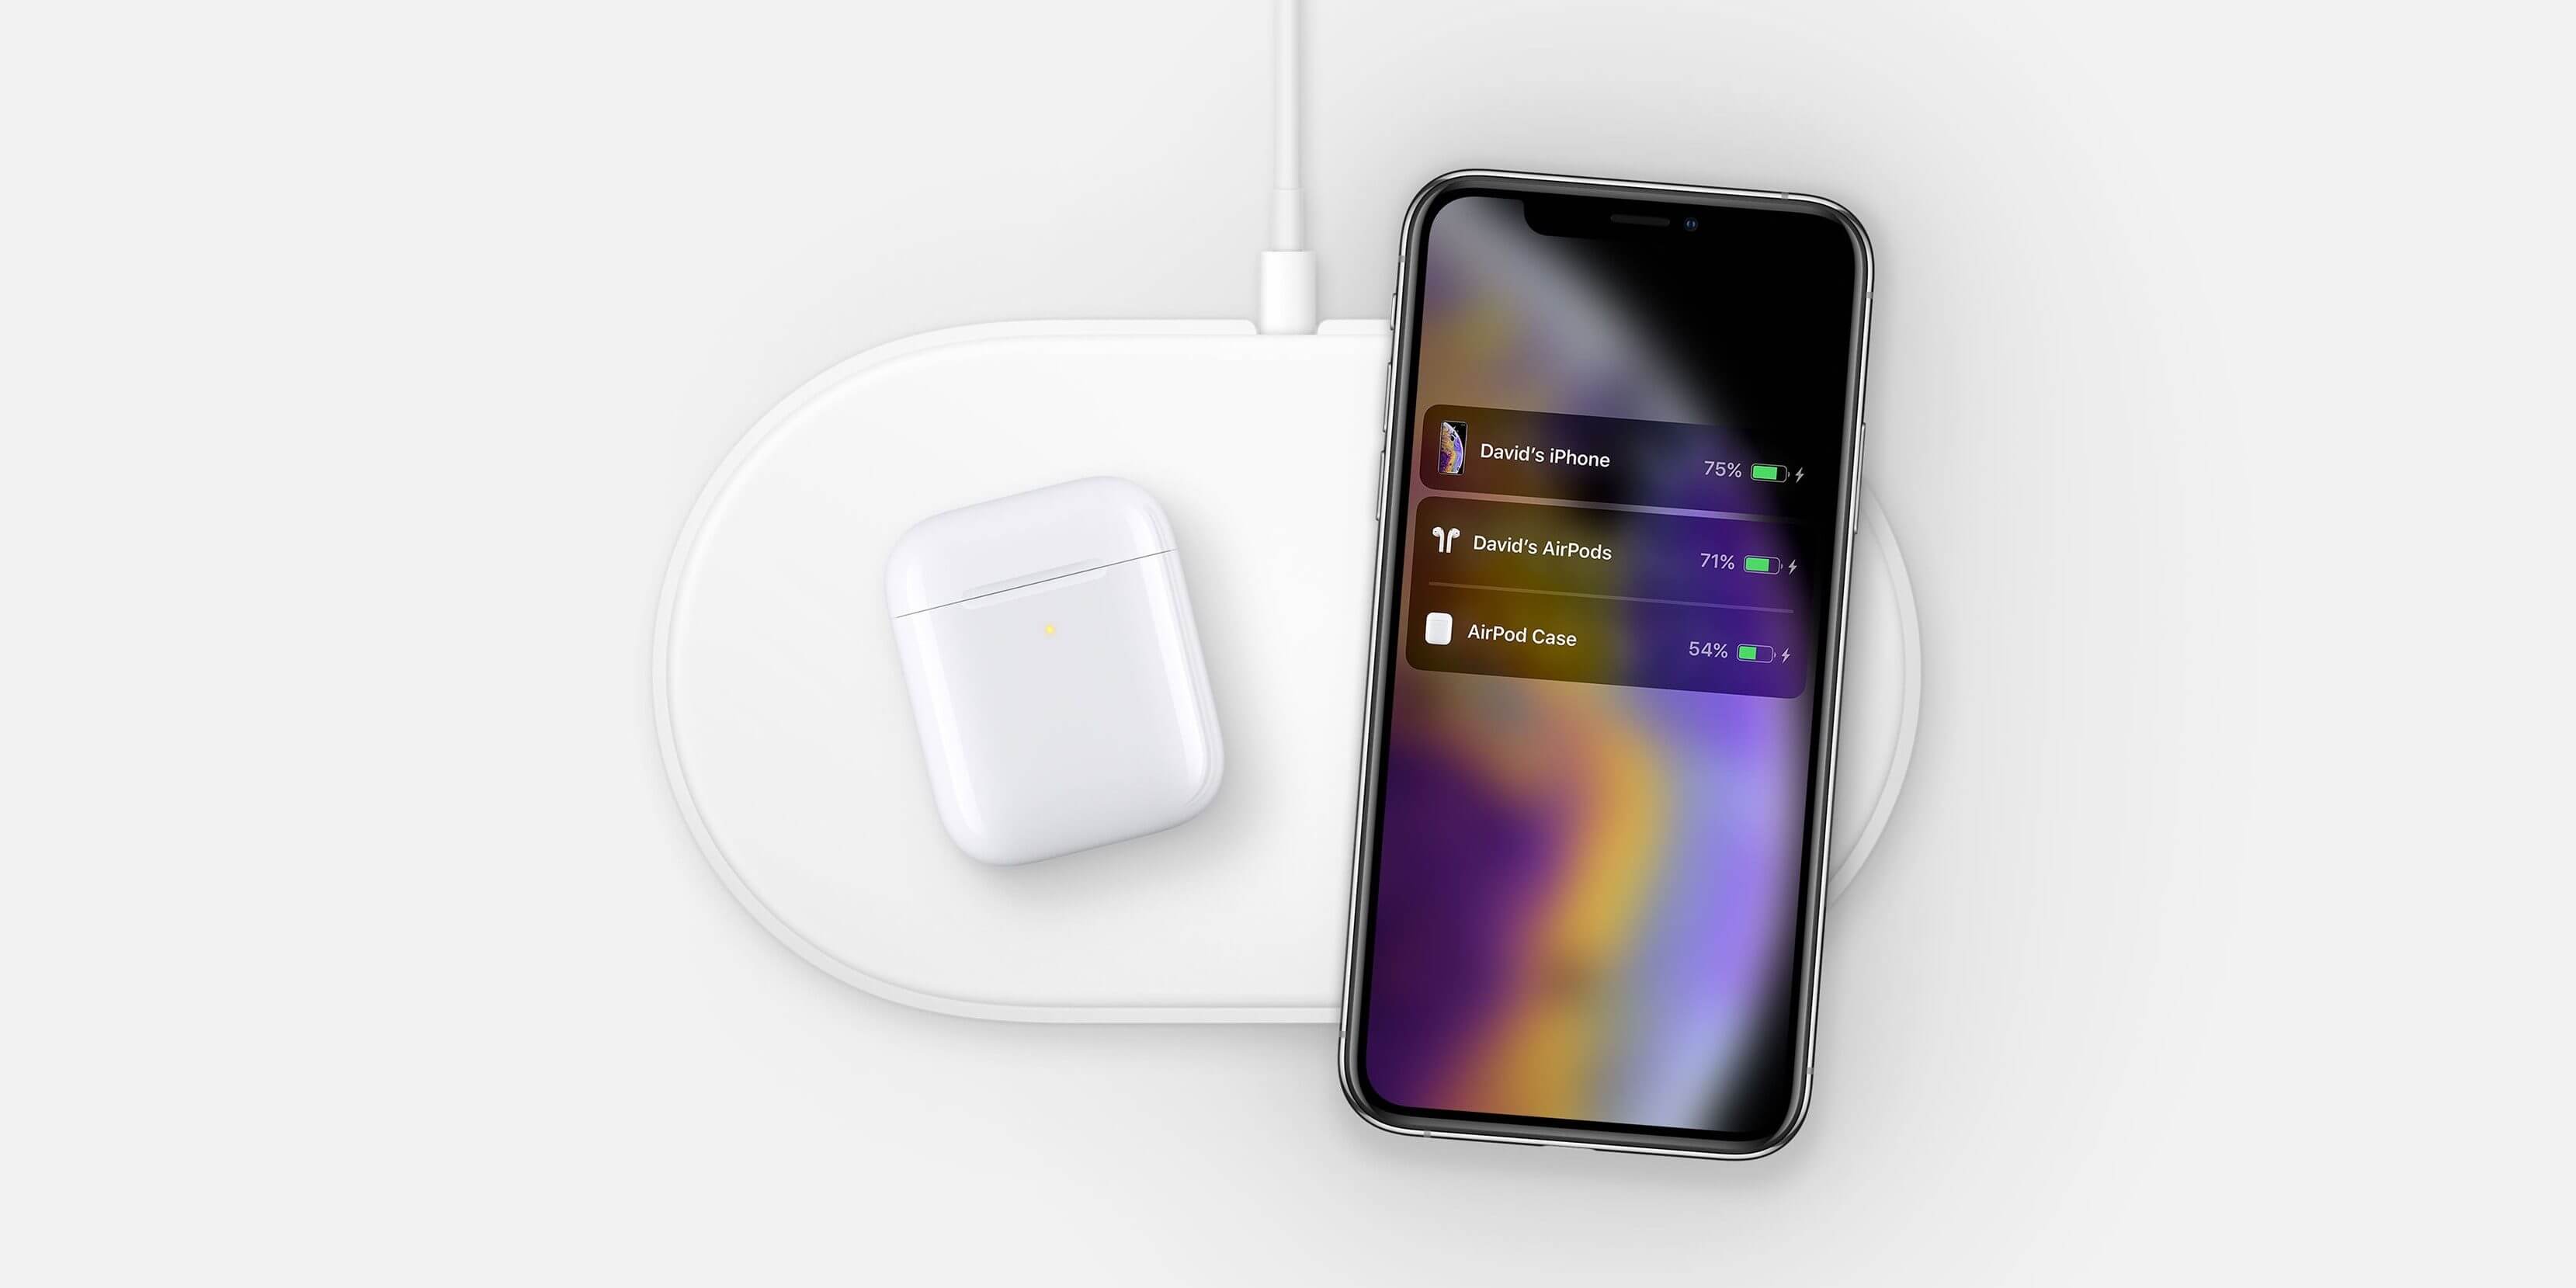 Hidden AirPower image with iPhone XS and new AirPods